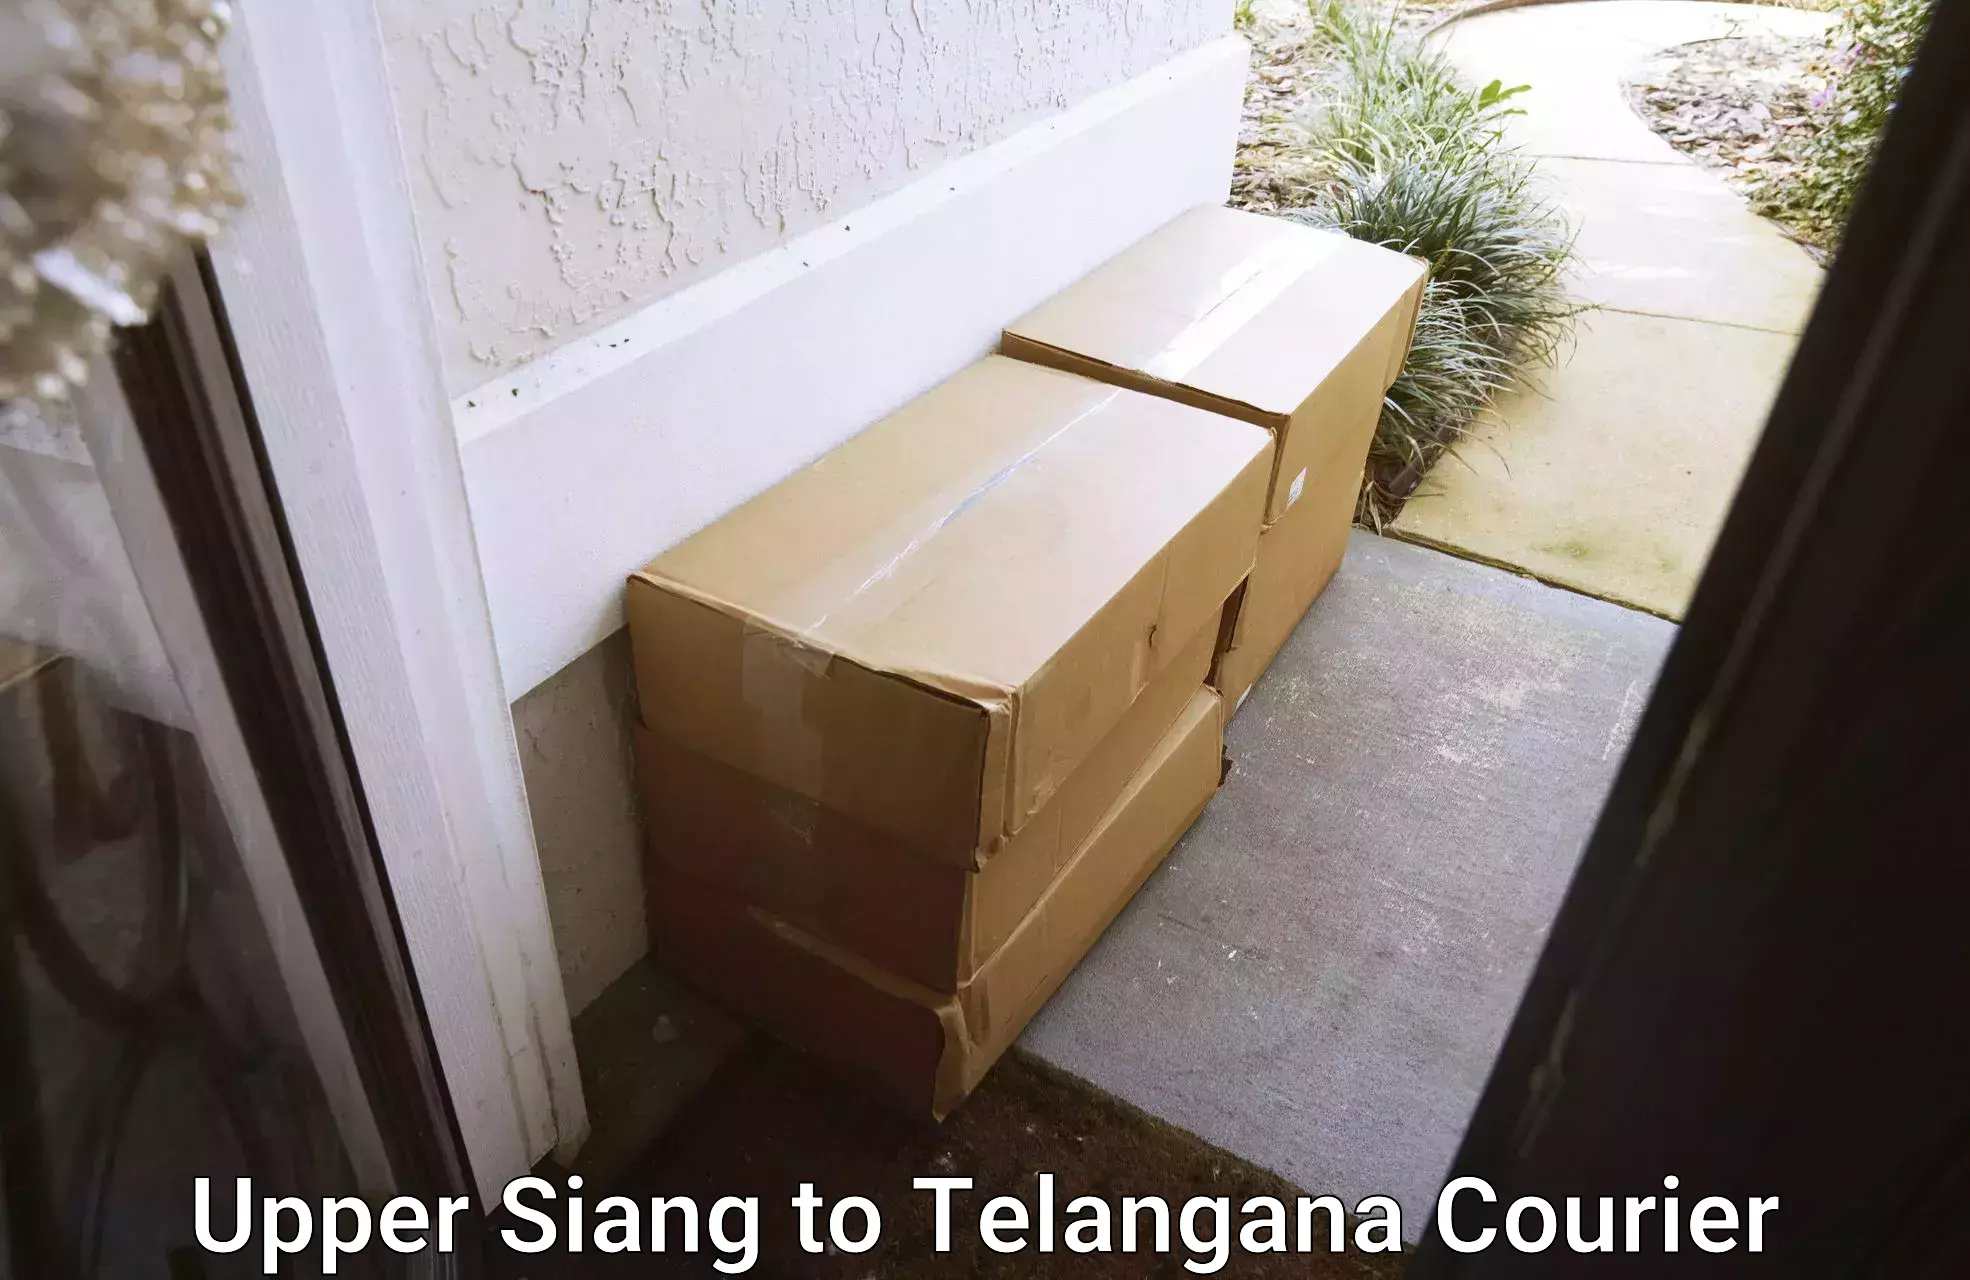 High-capacity parcel service Upper Siang to Peddapalli